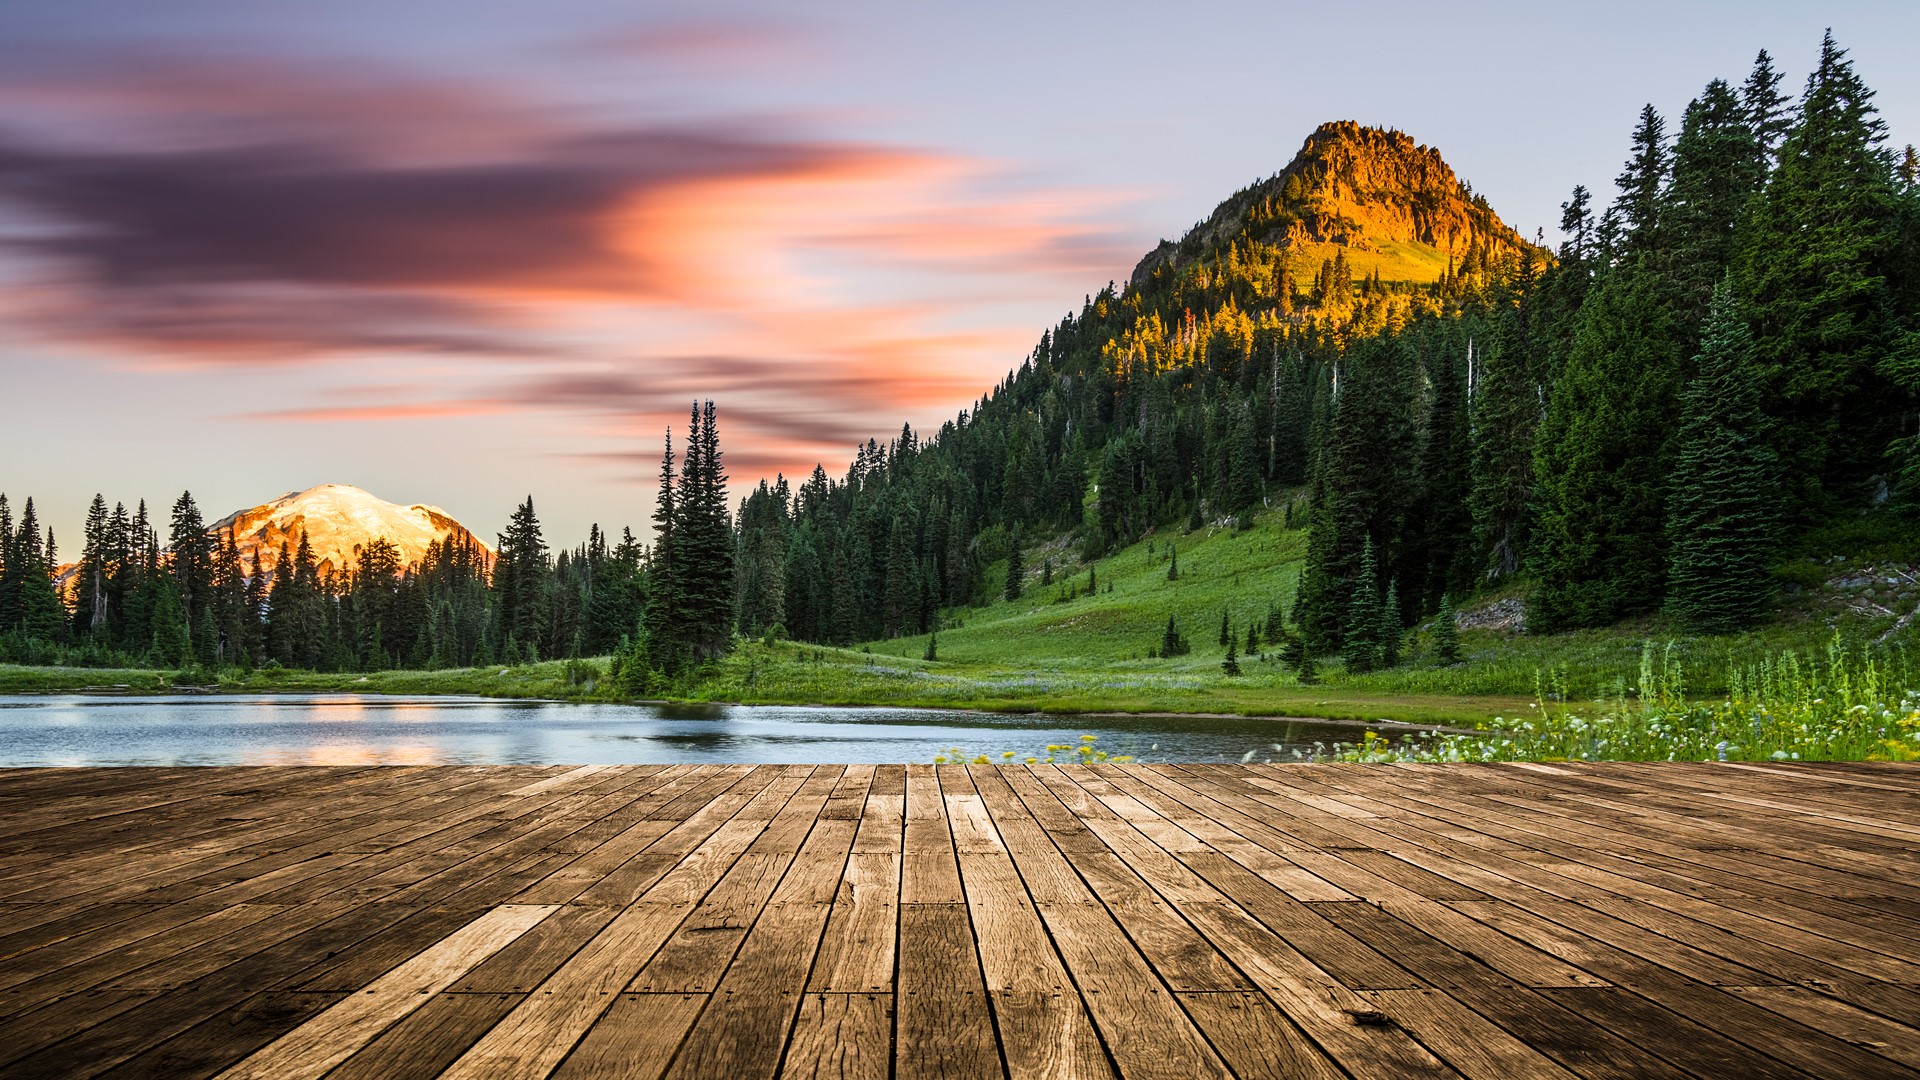 Nature Landscape Mountains Trees Forest Plants Clouds Sky Sunset Water Lake Wooden Floor Mt Rainier  1920x1080